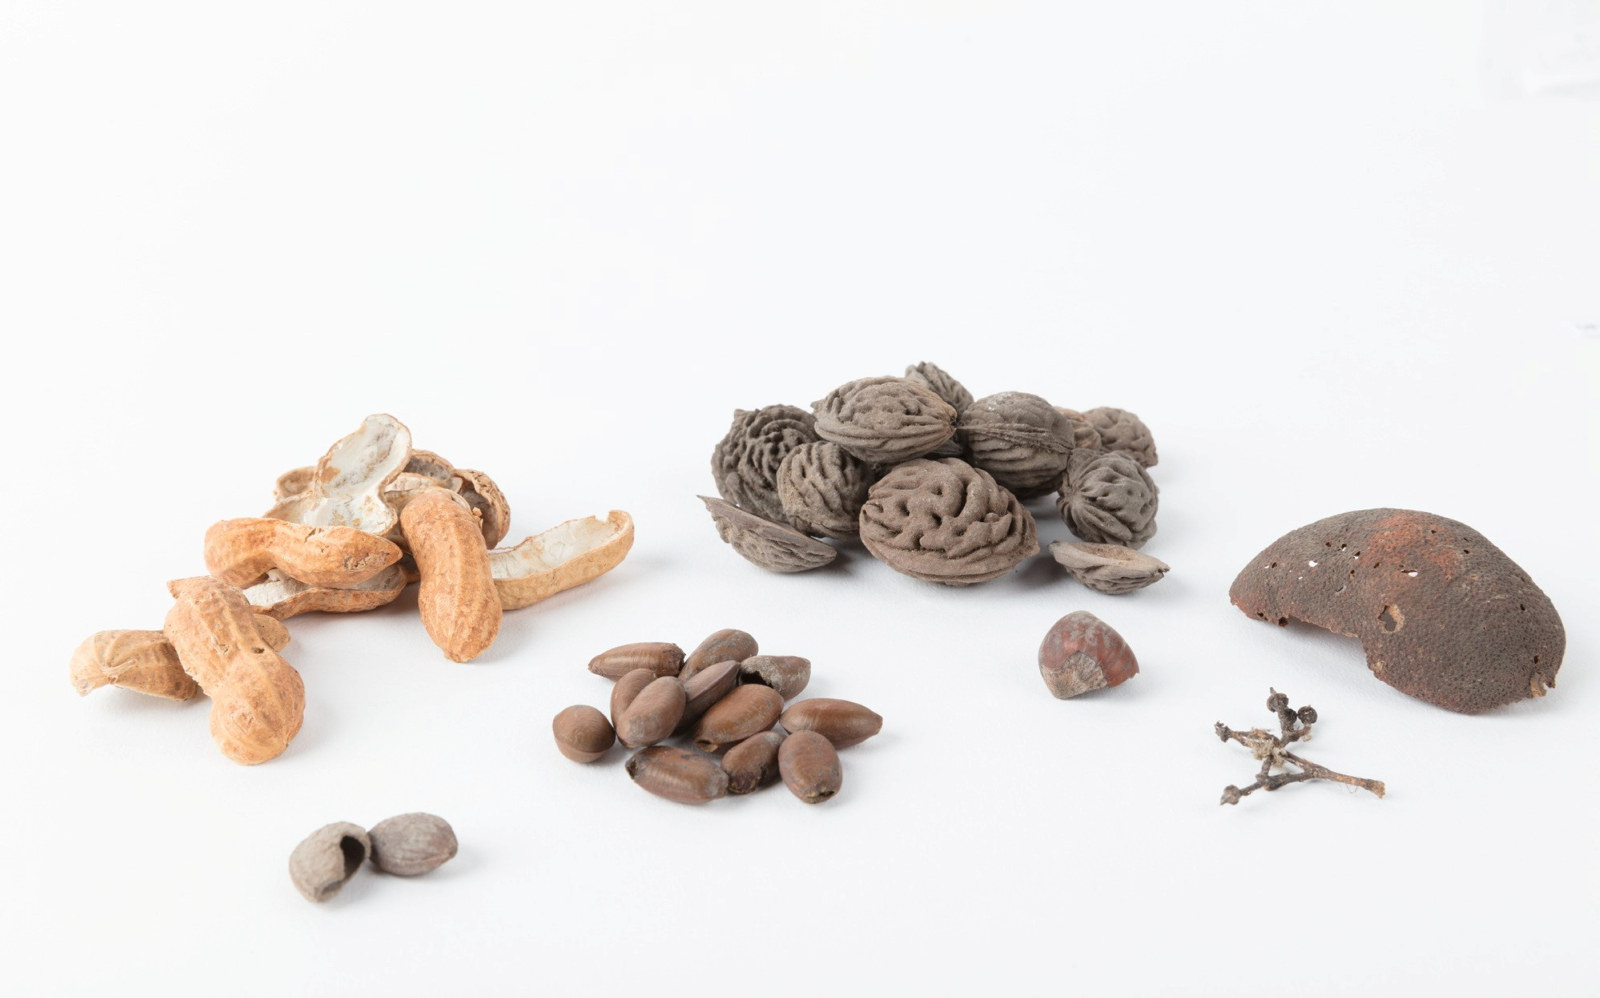 Collection of nuts, seeds and fruit which includes peanut shells, peach seeds, orange peel, a hazelnut shell, plum seeds and a grape stem